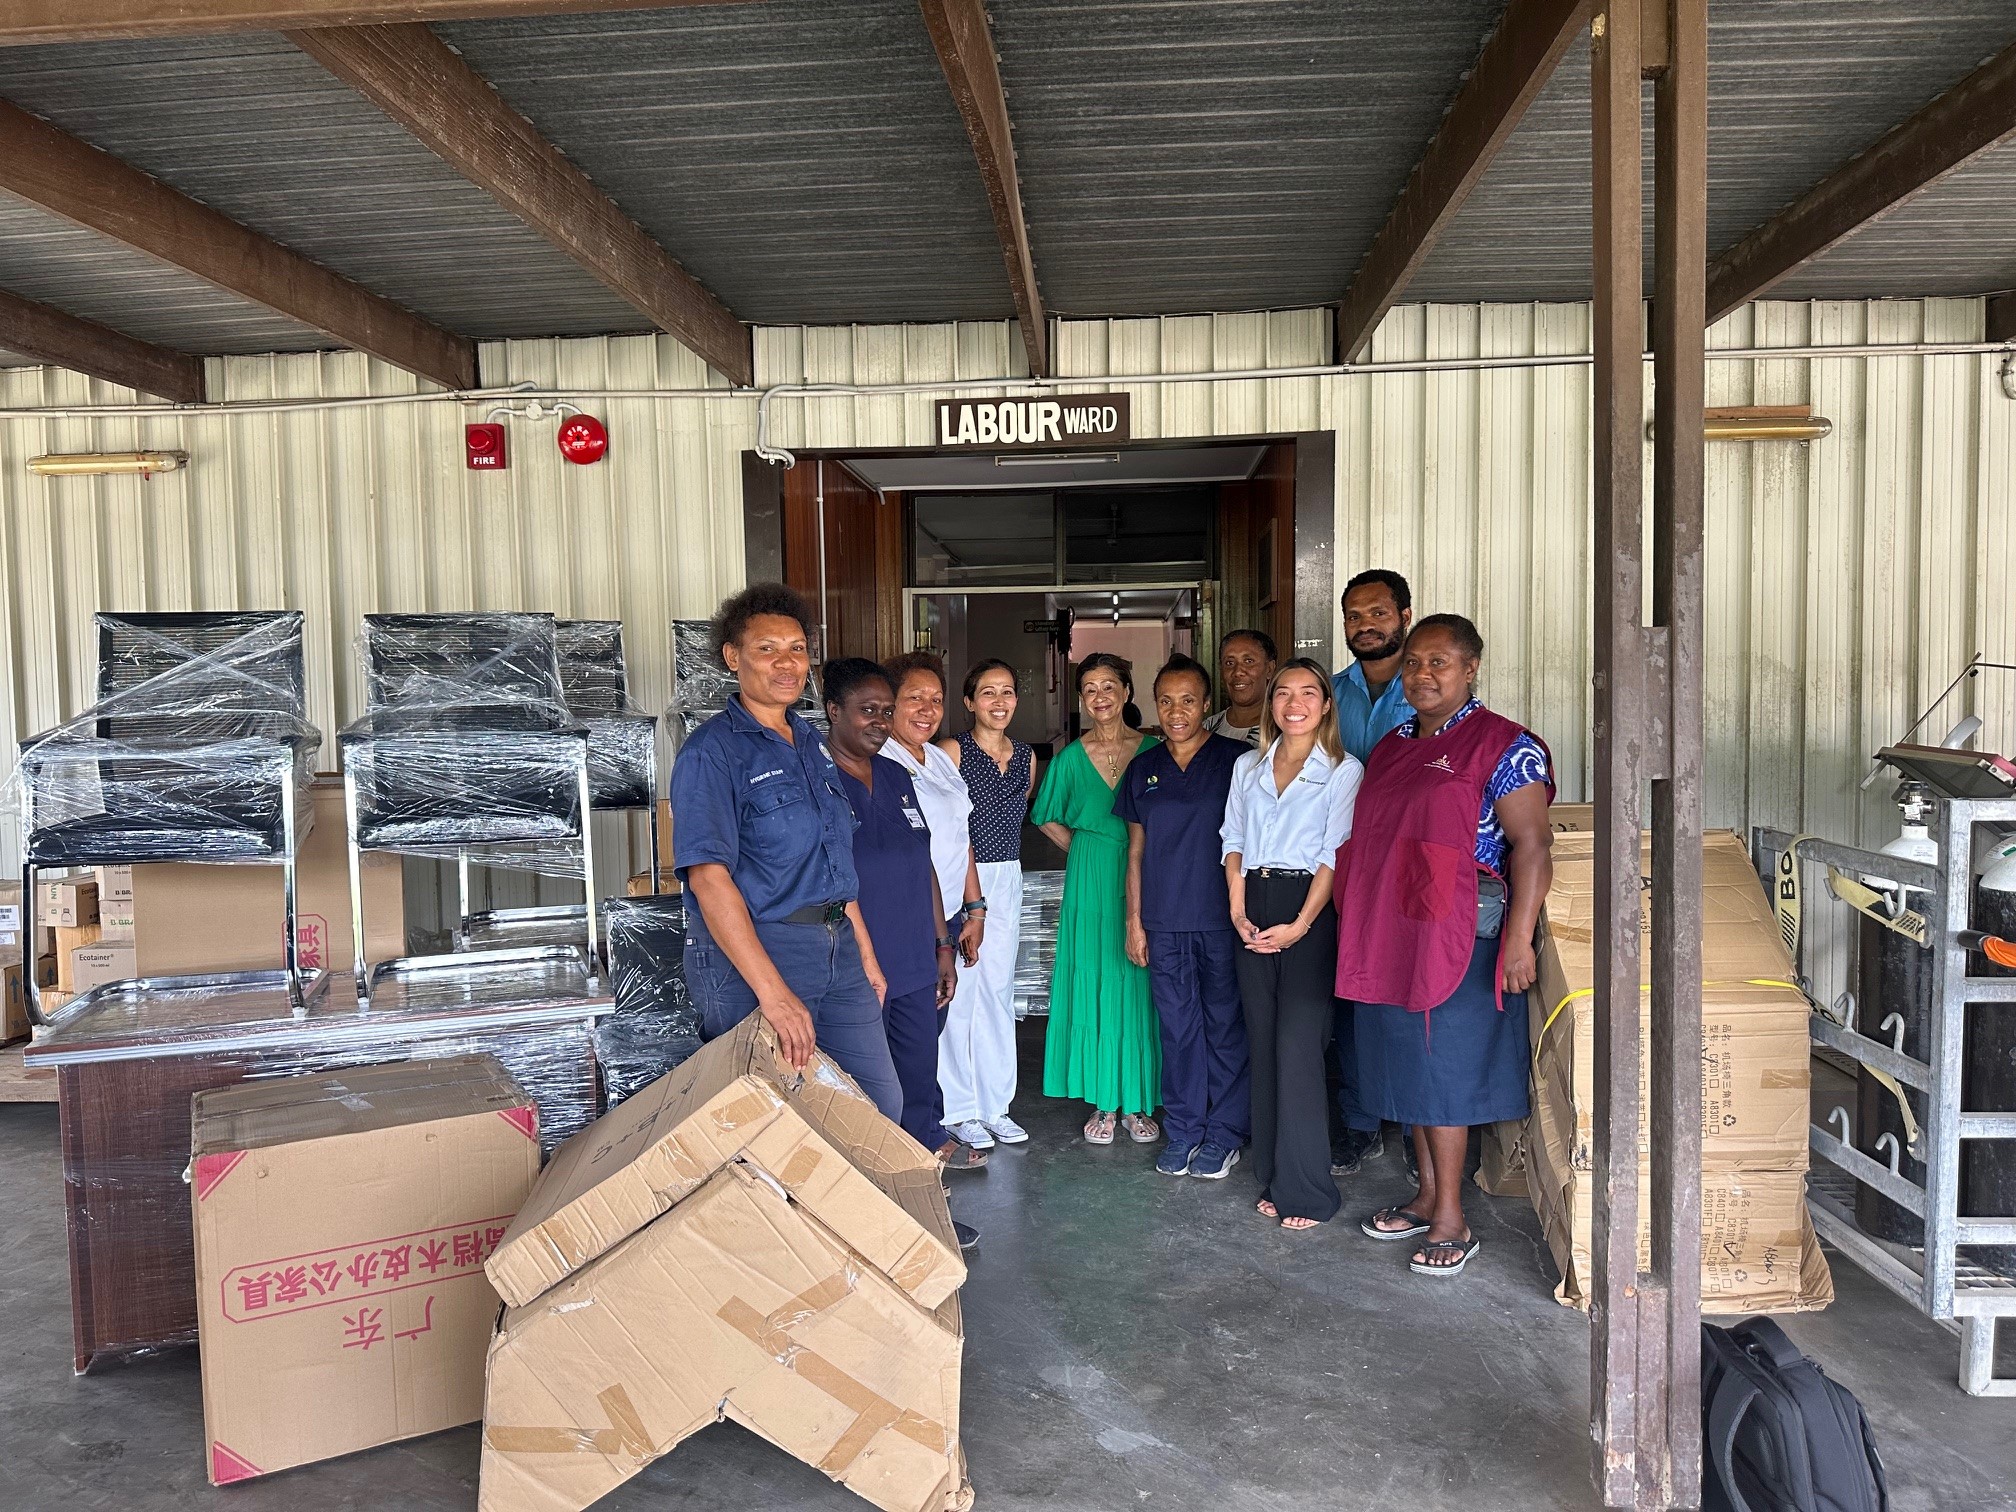 POMGEN Labour Ward receives over K100,000 worth of donations